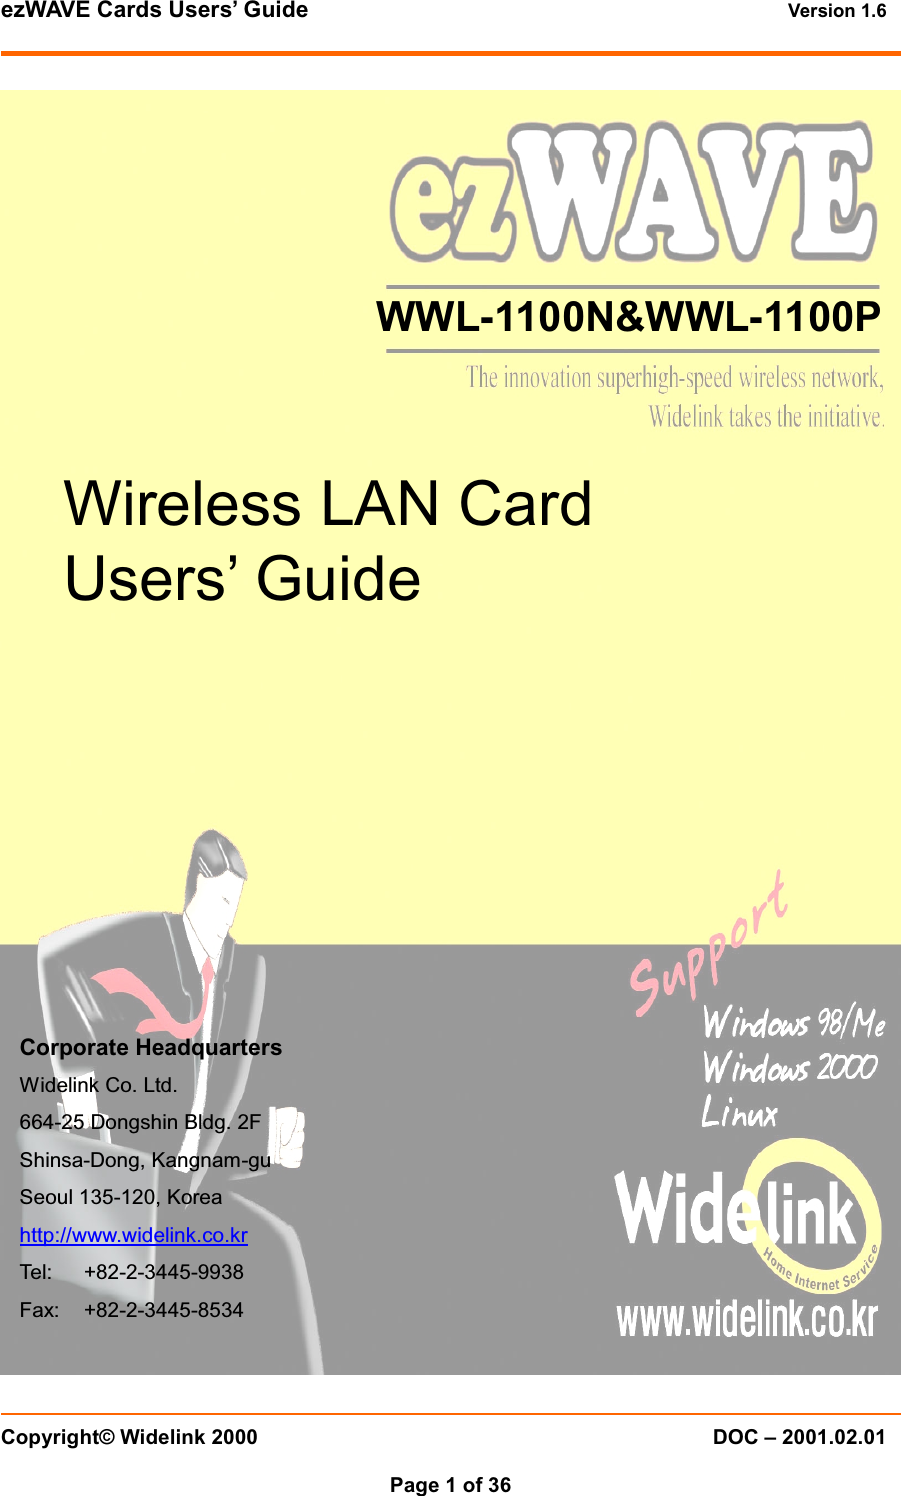 ezWAVE Cards Users’ Guide Version 1.6 Copyright© Widelink 2000 DOC – 2001.02.01Page 1 of 36 WWL-1100N&amp;WWL-1100PWireless LAN CardUsers’ GuideCorporate HeadquartersWidelink Co. Ltd.664-25 Dongshin Bldg. 2FShinsa-Dong, Kangnam-guSeoul 135-120, Koreahttp://www.widelink.co.krTel: +82-2-3445-9938Fax: +82-2-3445-8534